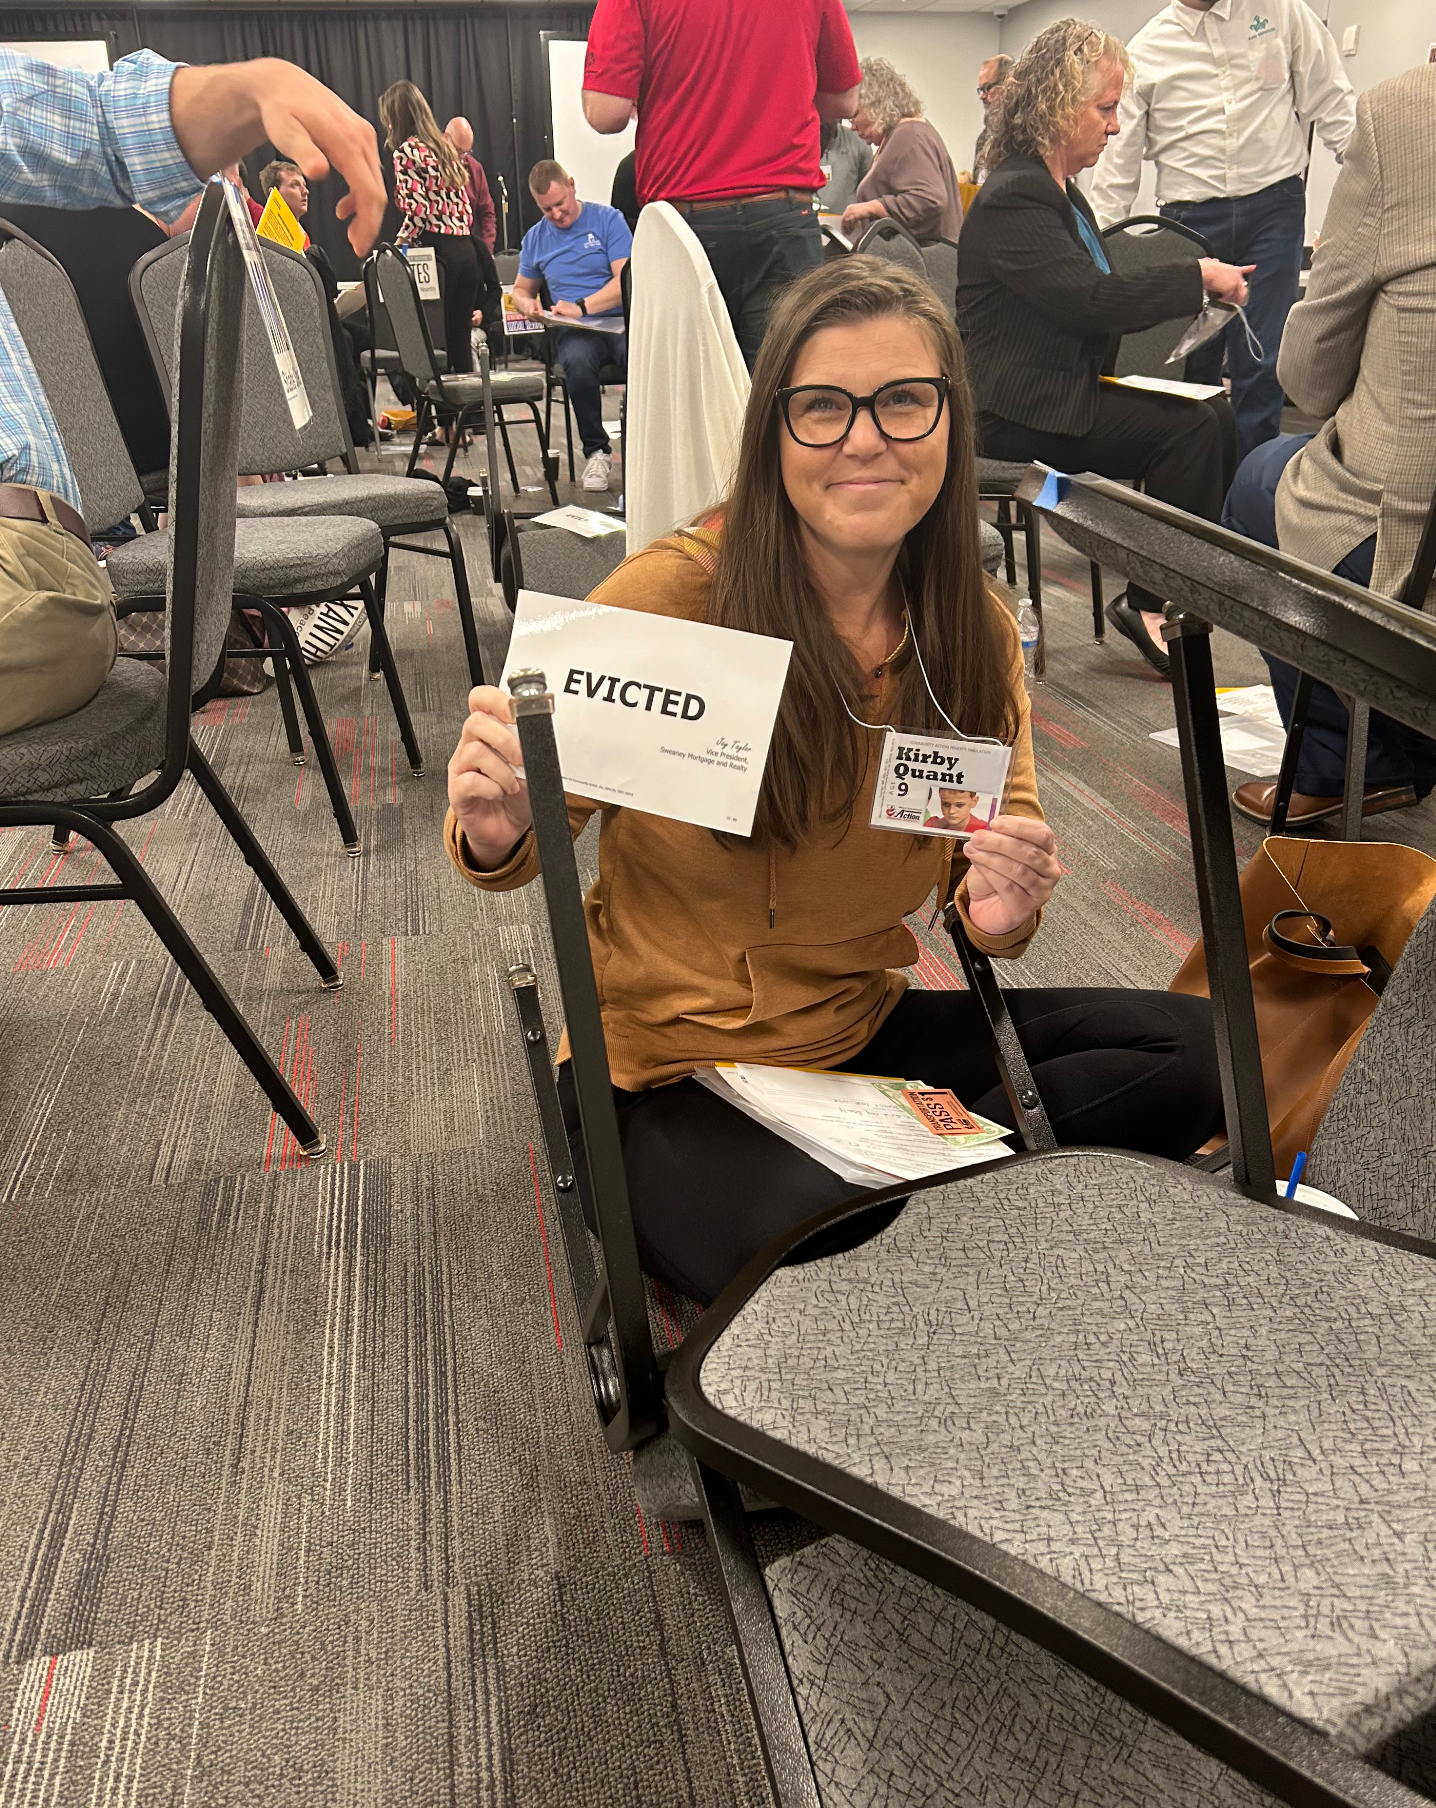 A girl sitting on the ground holding an eviction notice in a poverty simulation 